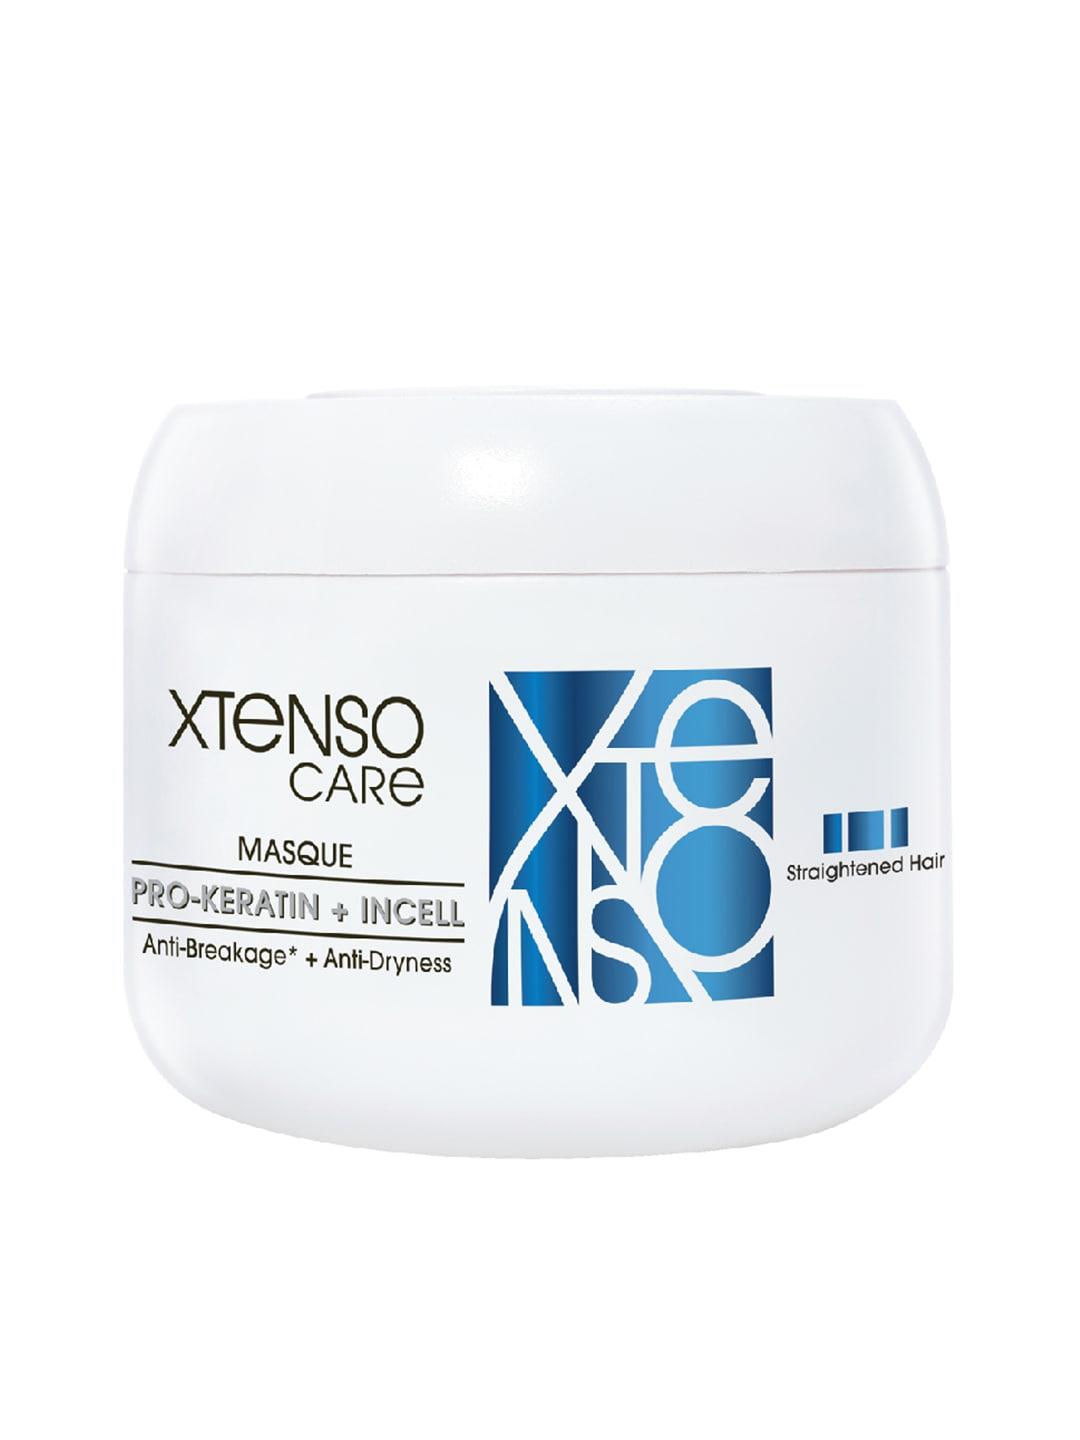 LOreal Professionnel XtensoCare Mask with Pro-Keratin & Incell for Straightened Hair-196g